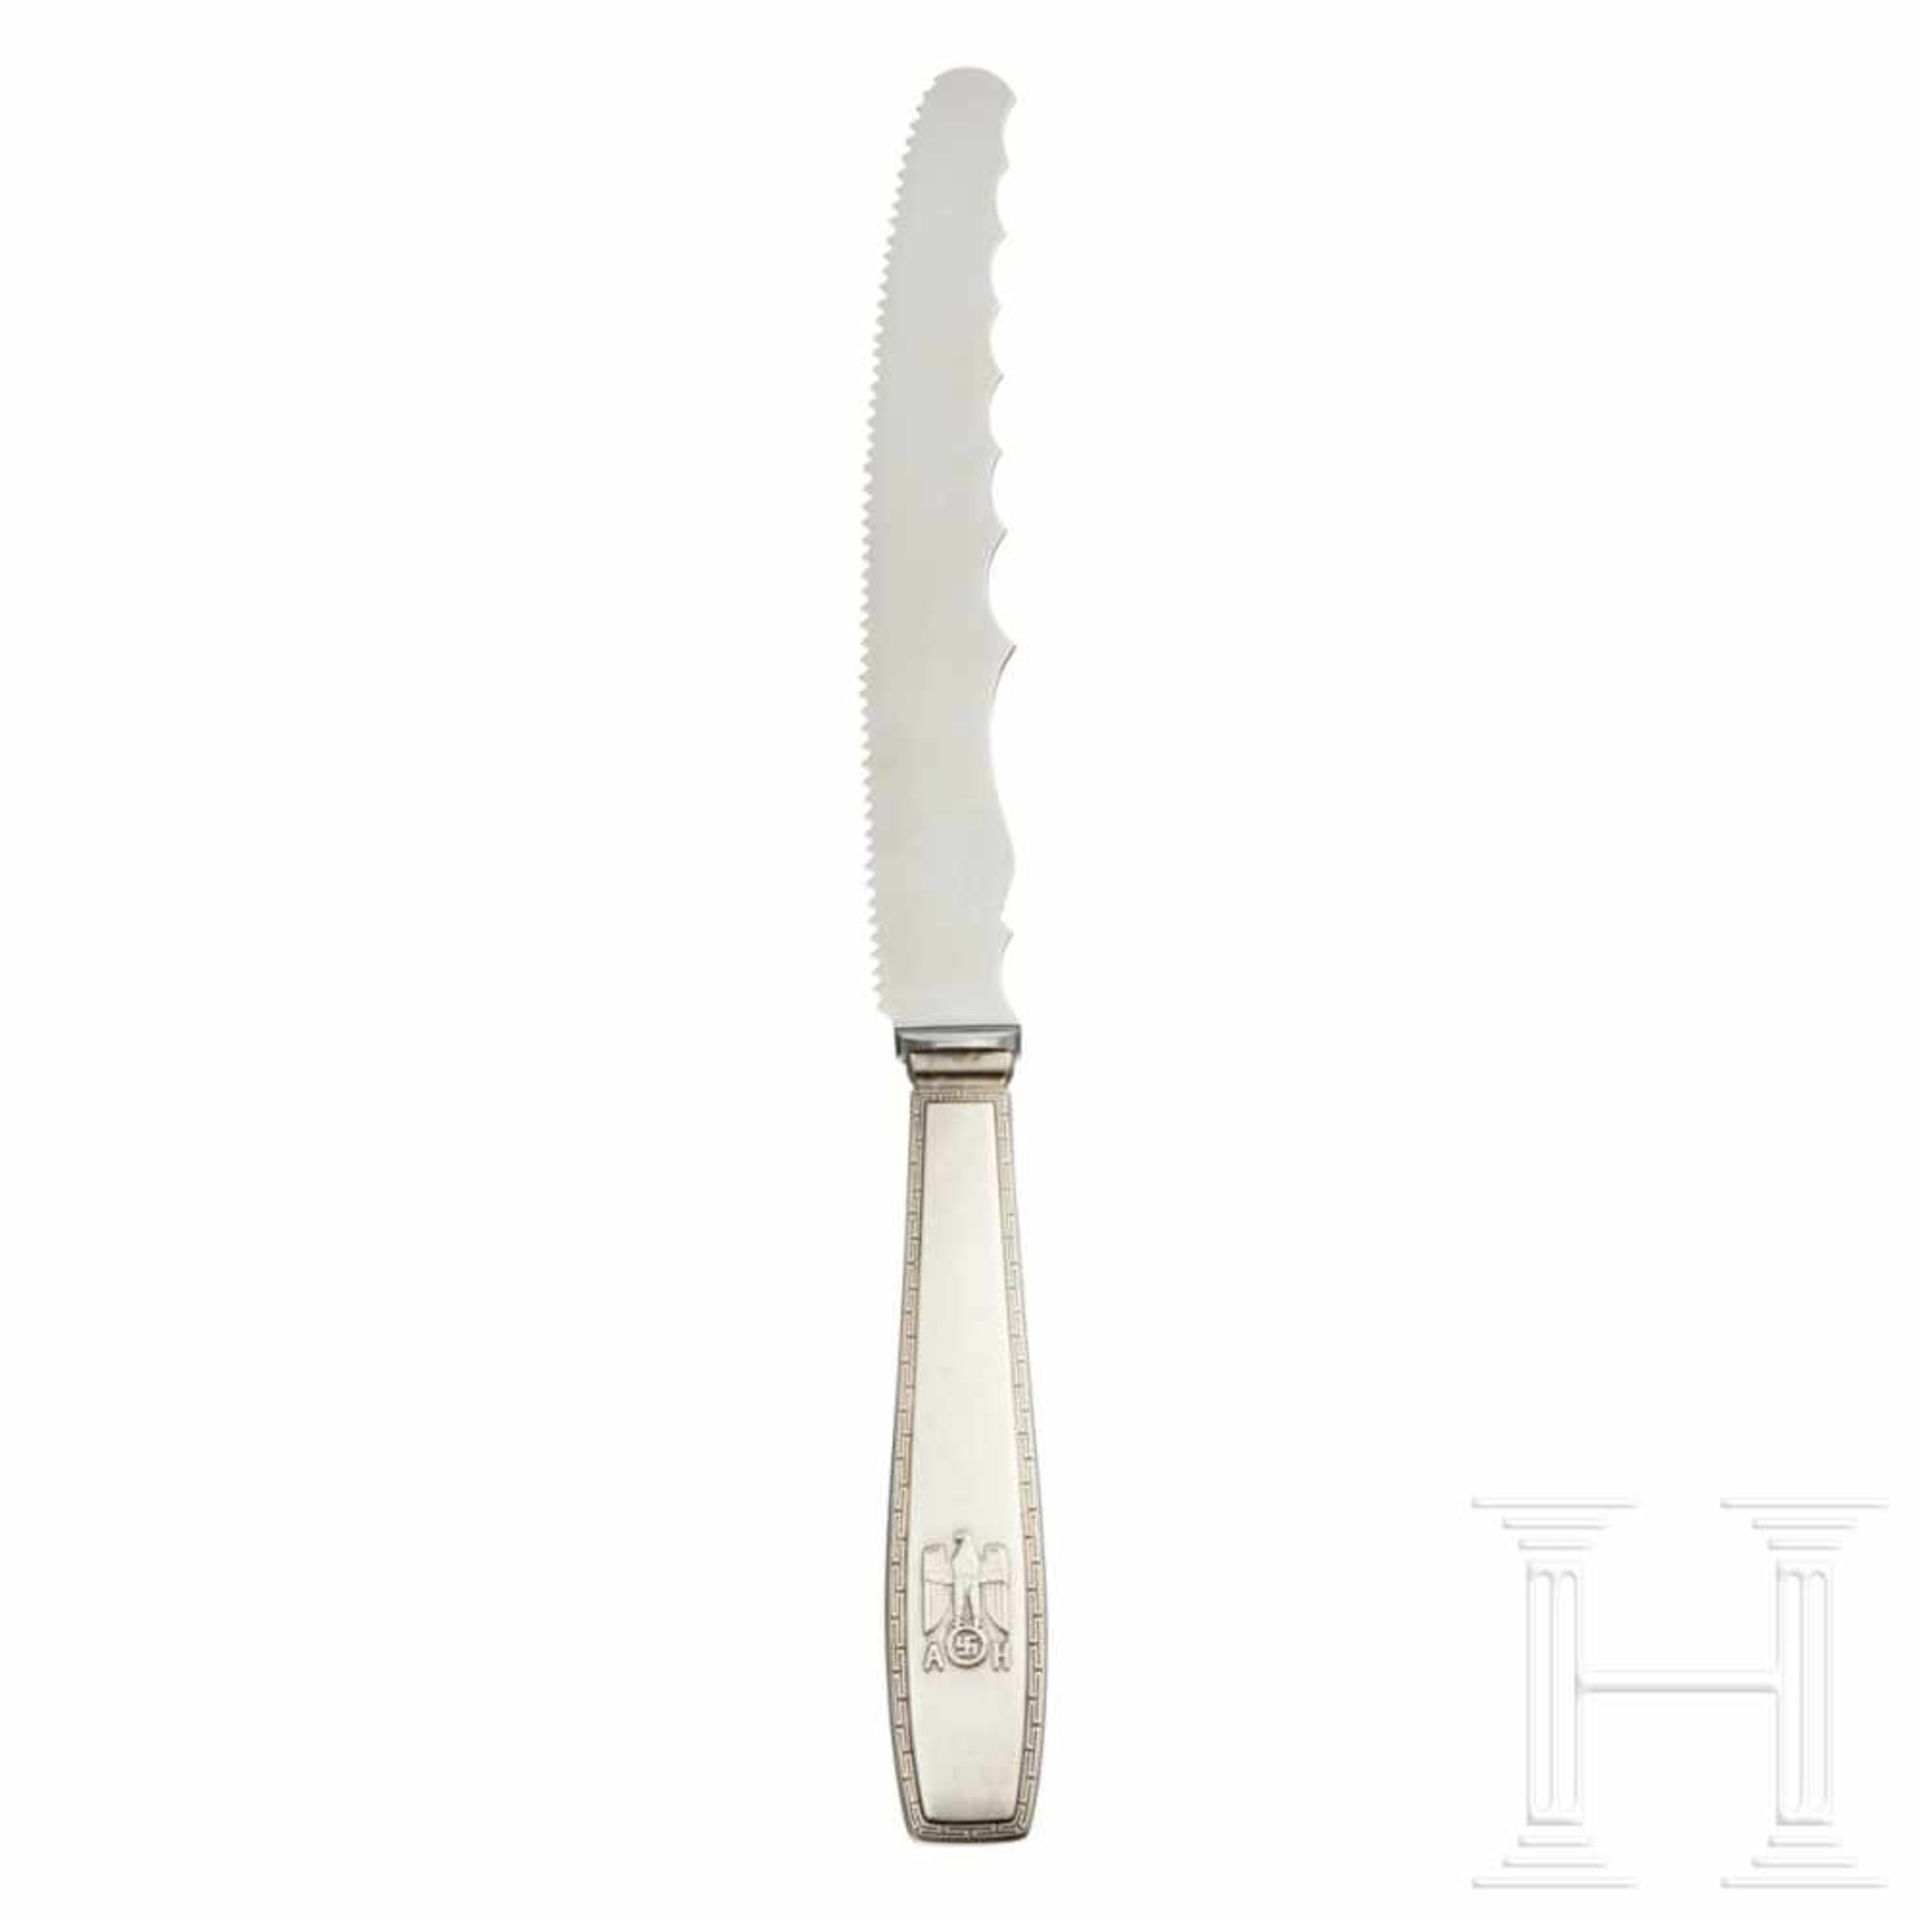 Adolf Hitler – a Steak Knife from his Personal Silver ServiceSo called “formal pattern” with